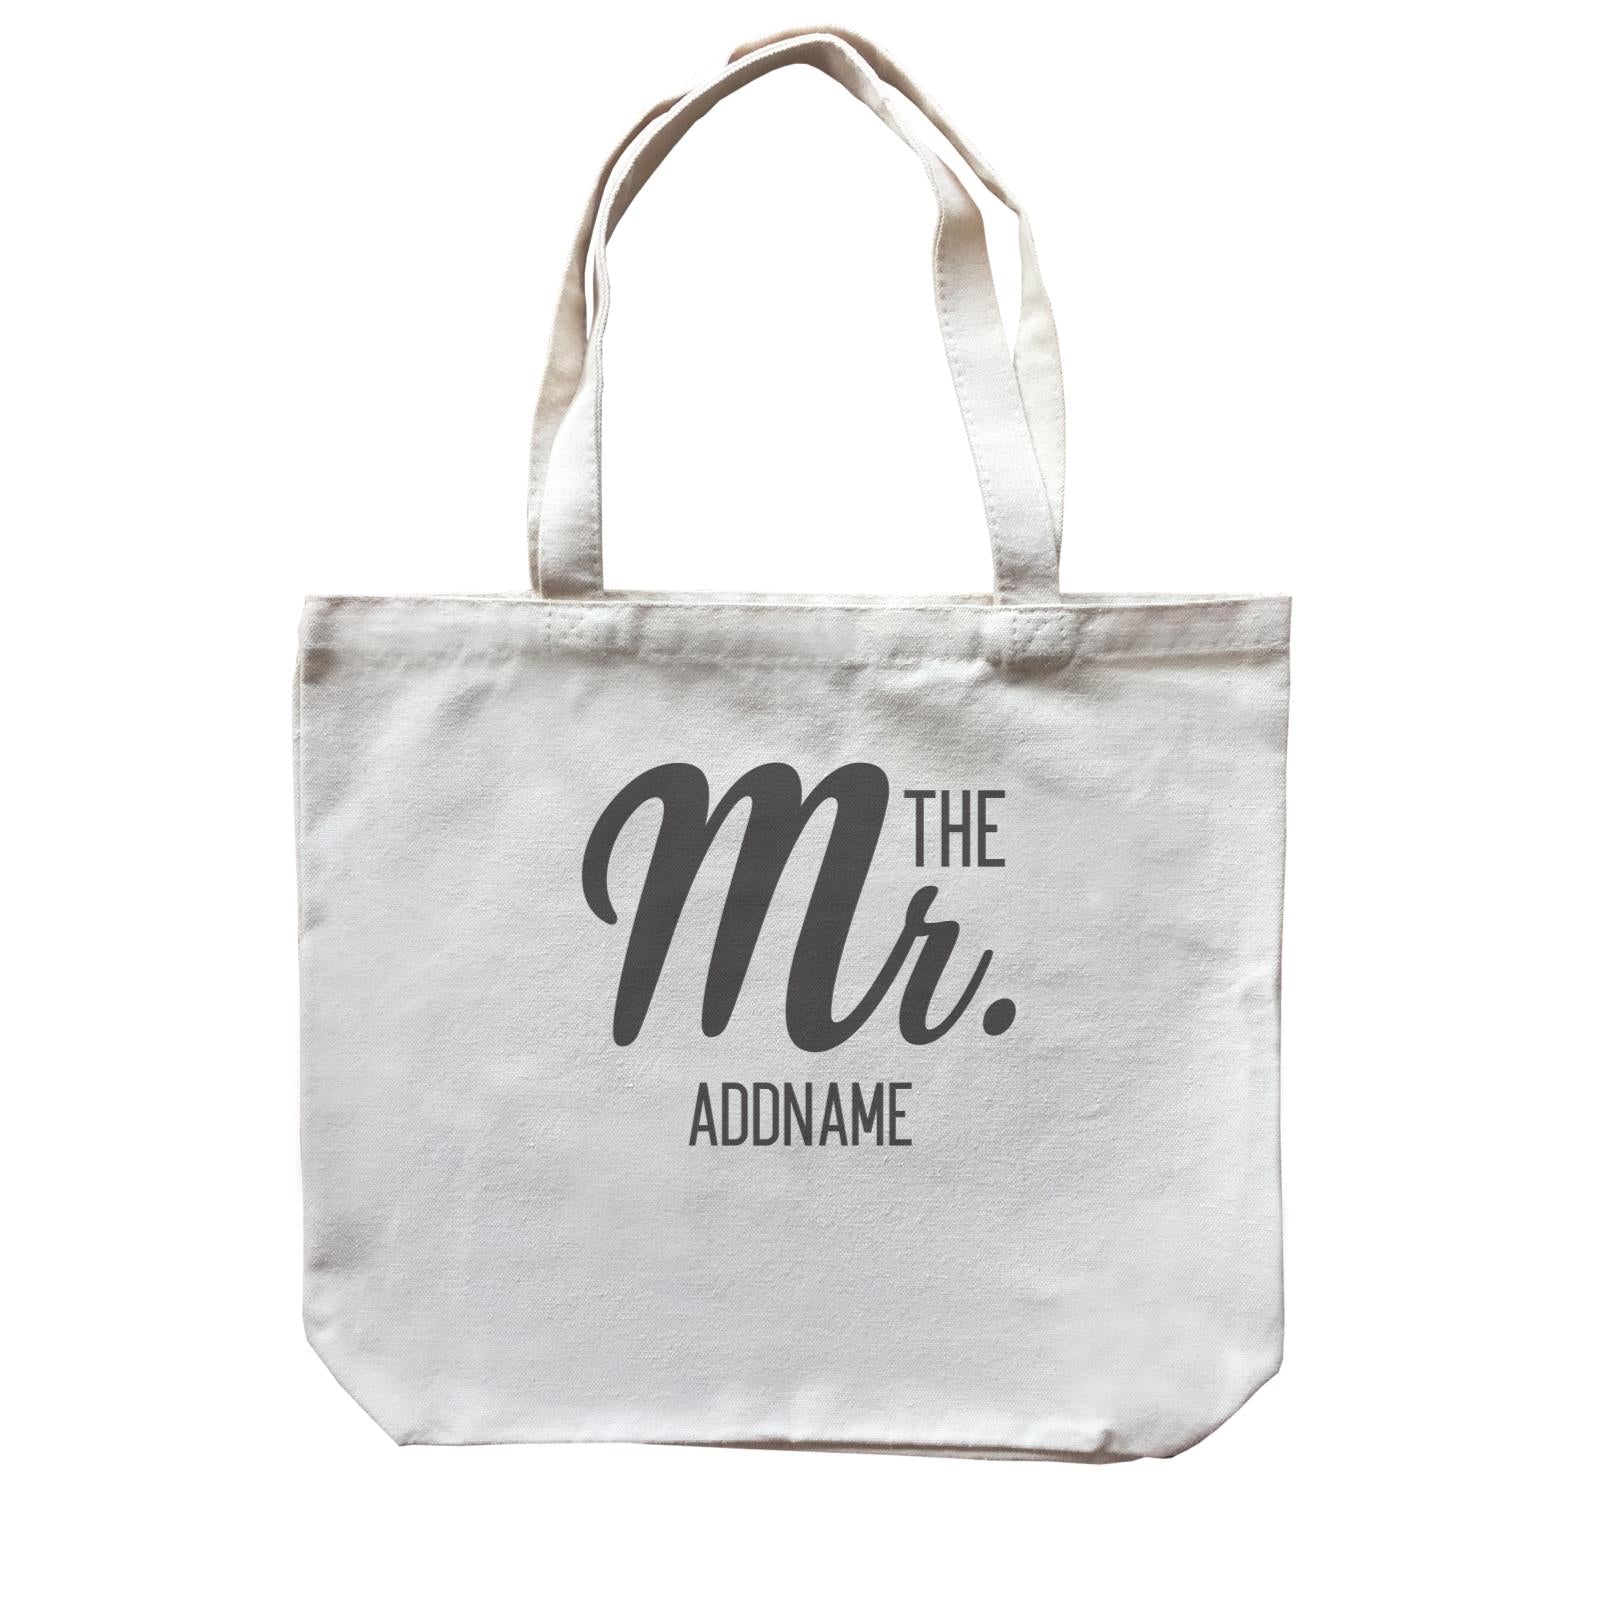 Husband and Wife The Mr. Addname Canvas Bag